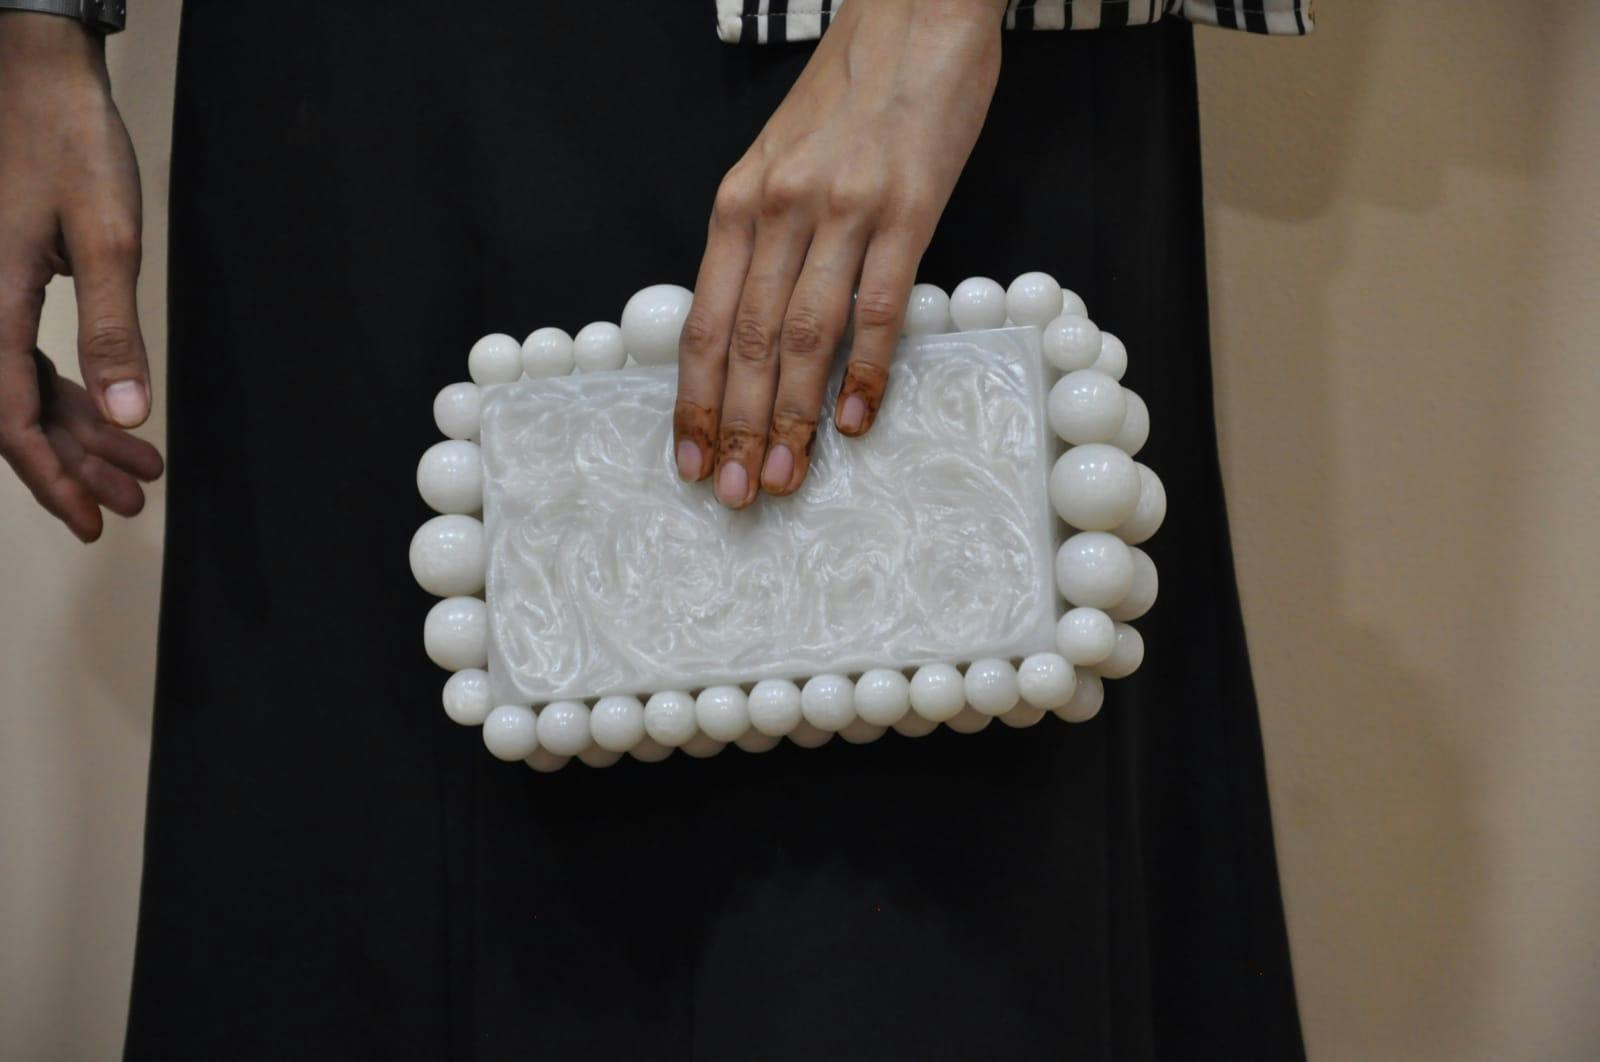 The POSH Pearly Clutch, a product by Clutcheeet